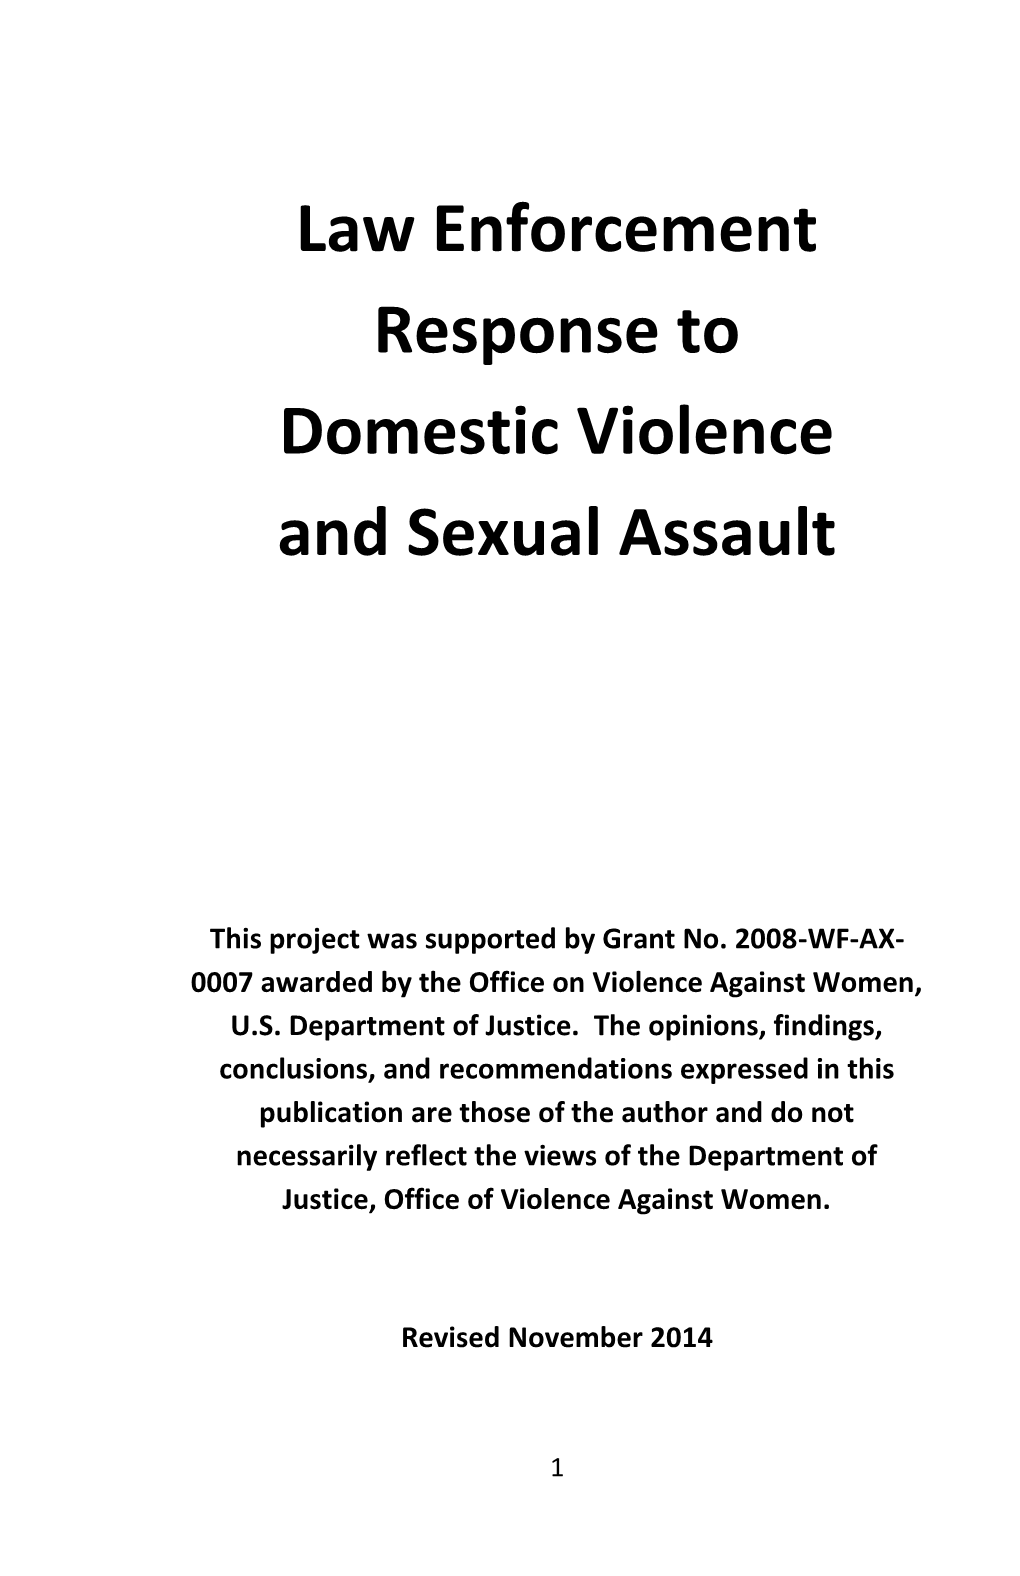 Law Enforcement Response to Domestic Violence and Sexual Assault